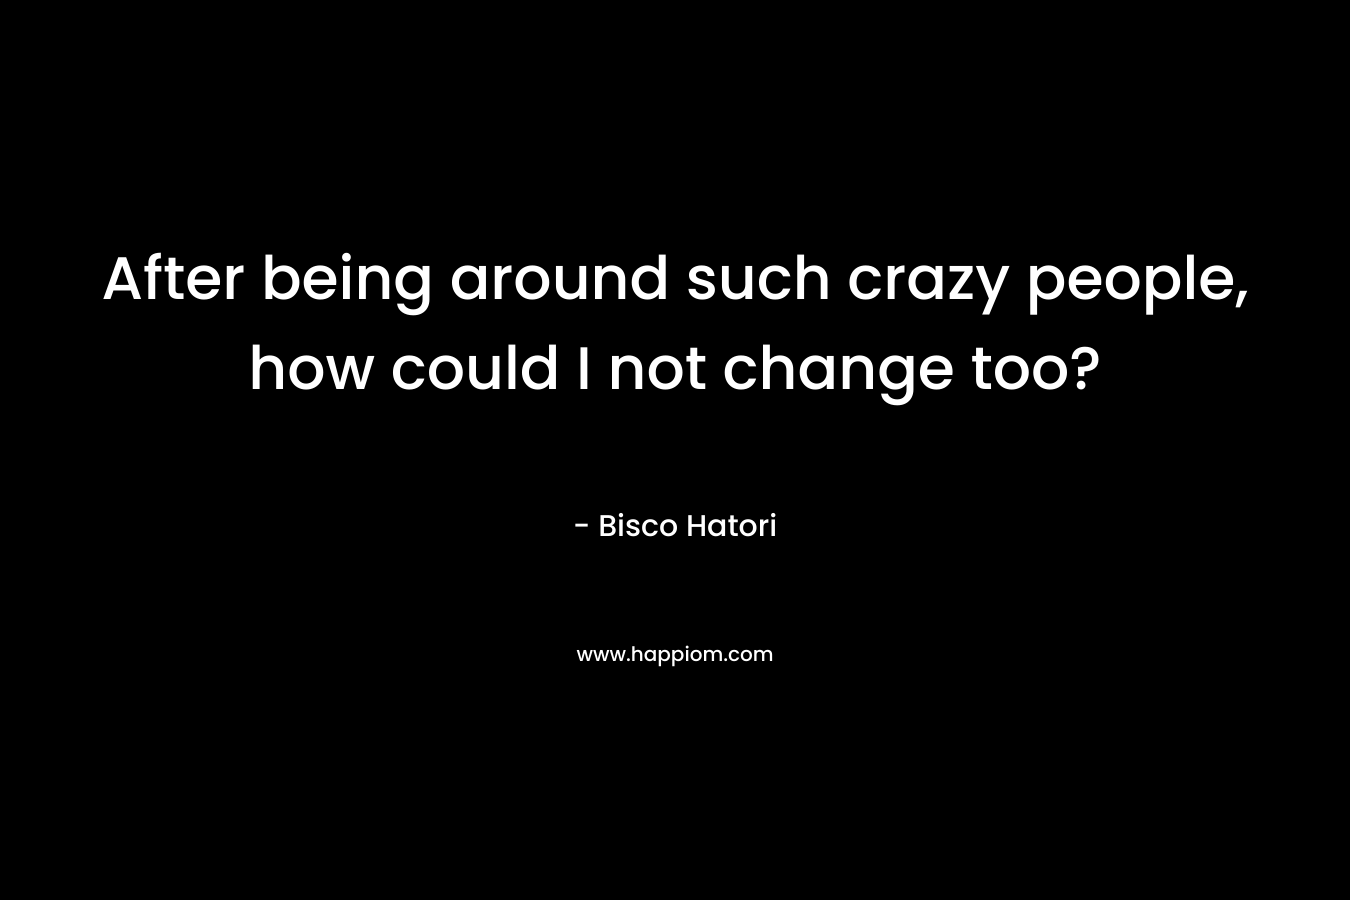 After being around such crazy people, how could I not change too? – Bisco Hatori